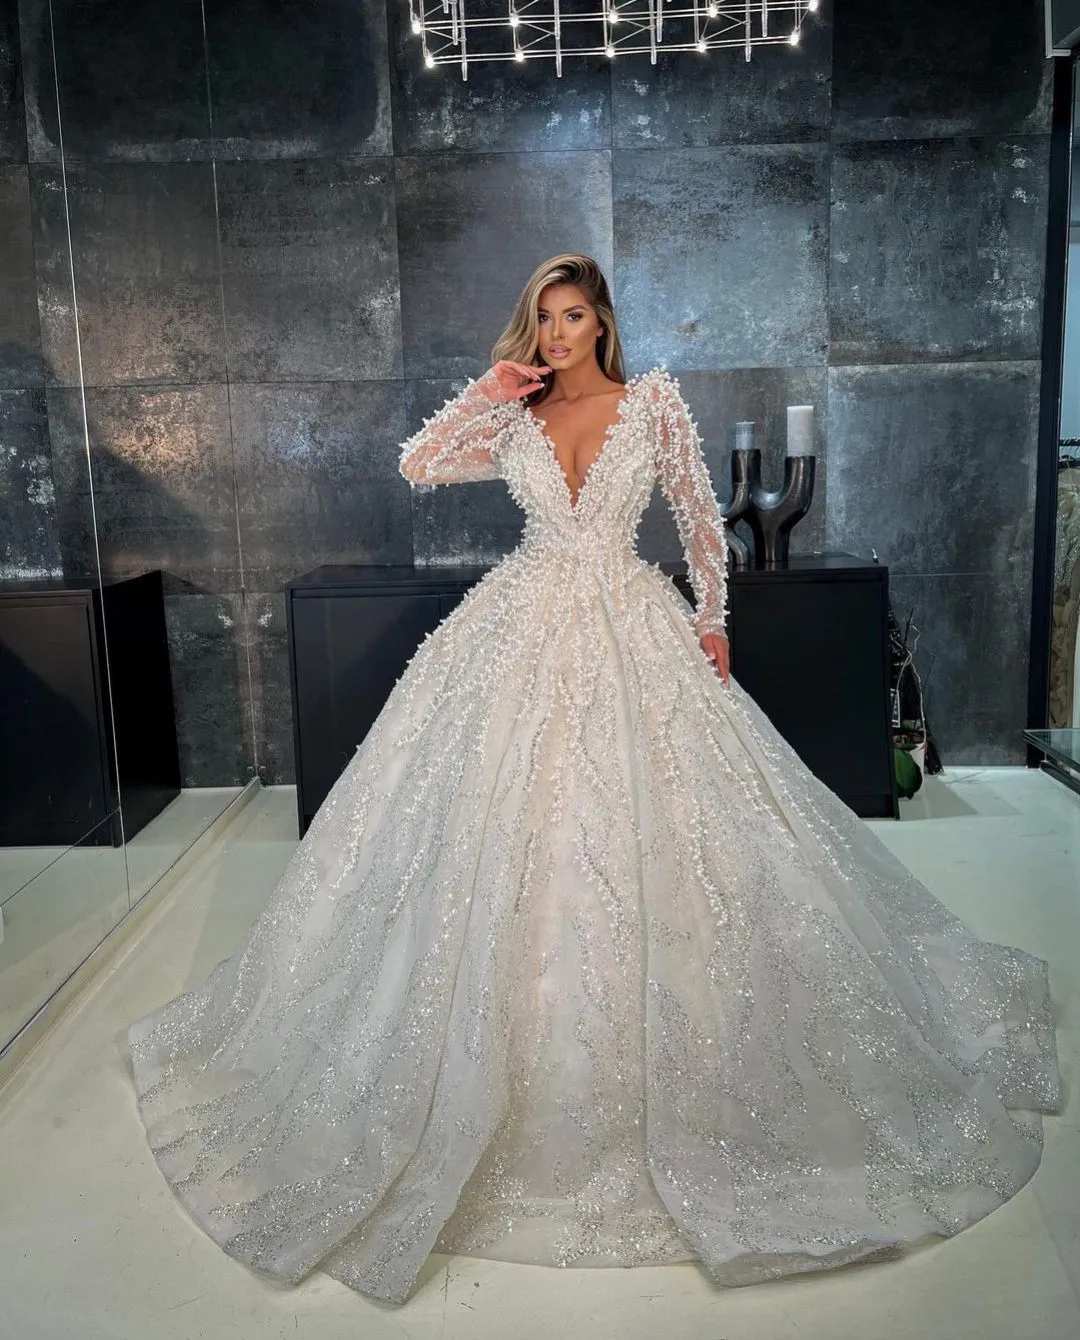 Luxury Ball Gown Wedding Dresses Long Sleeves V Neck Sparkly Sequins Pearls Appliques Beaded Ruffles Zipper Bridal Gowns Plus Size Custom Made Vestido de novia